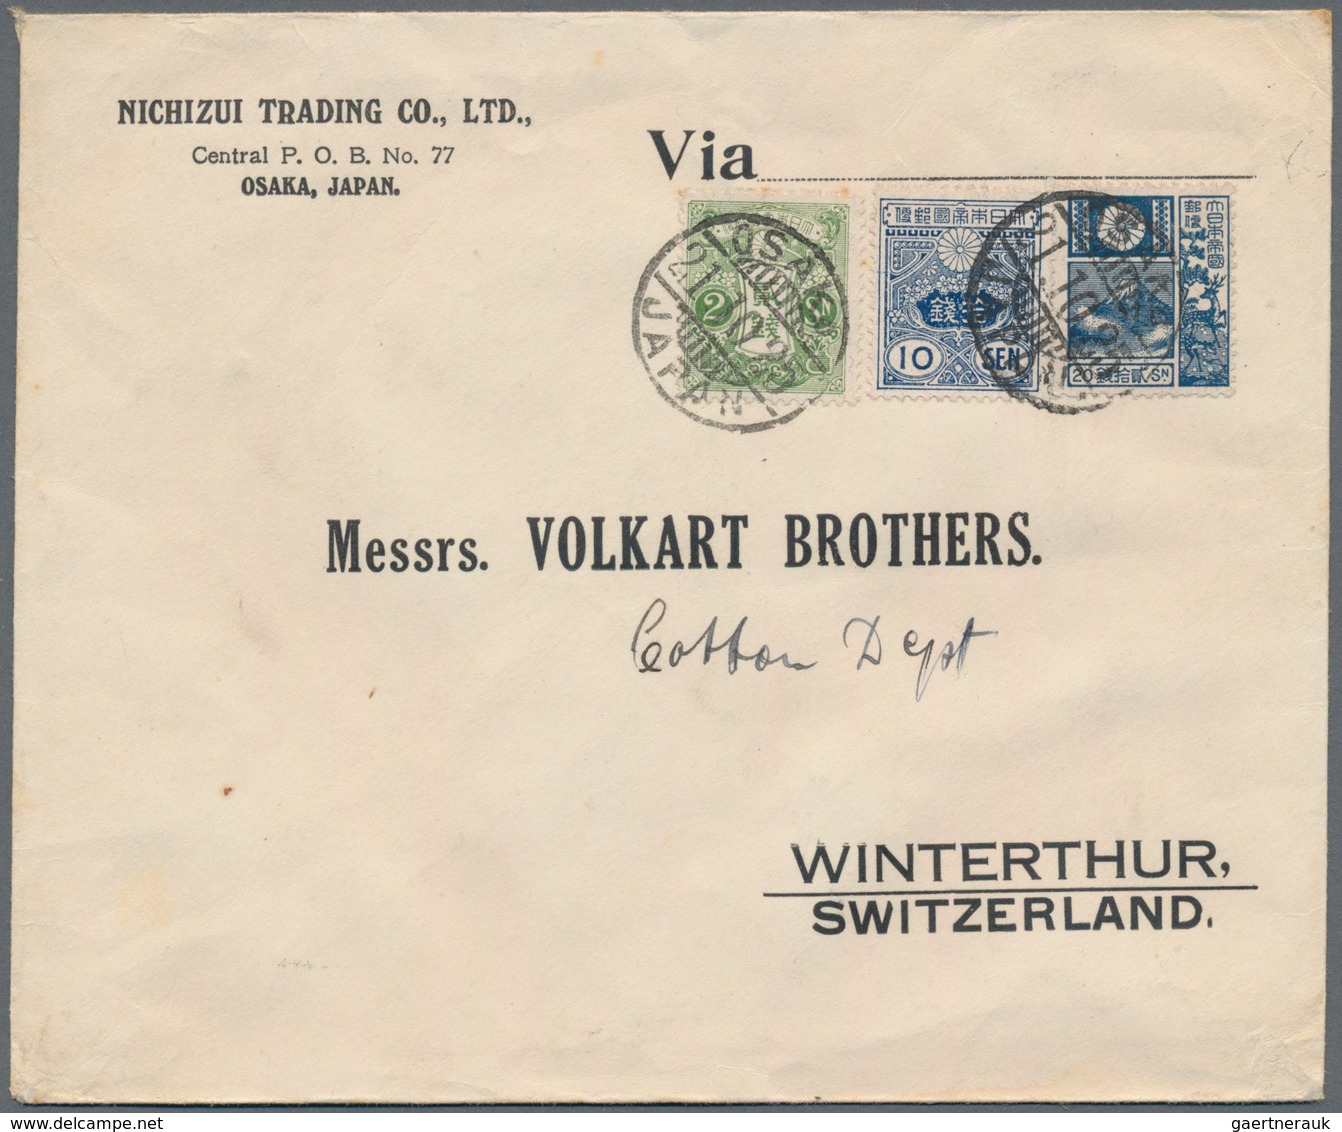 Japan: 1917/29, covers to Switzerland (3) or Finland (1): printed matter with french censor tape, re